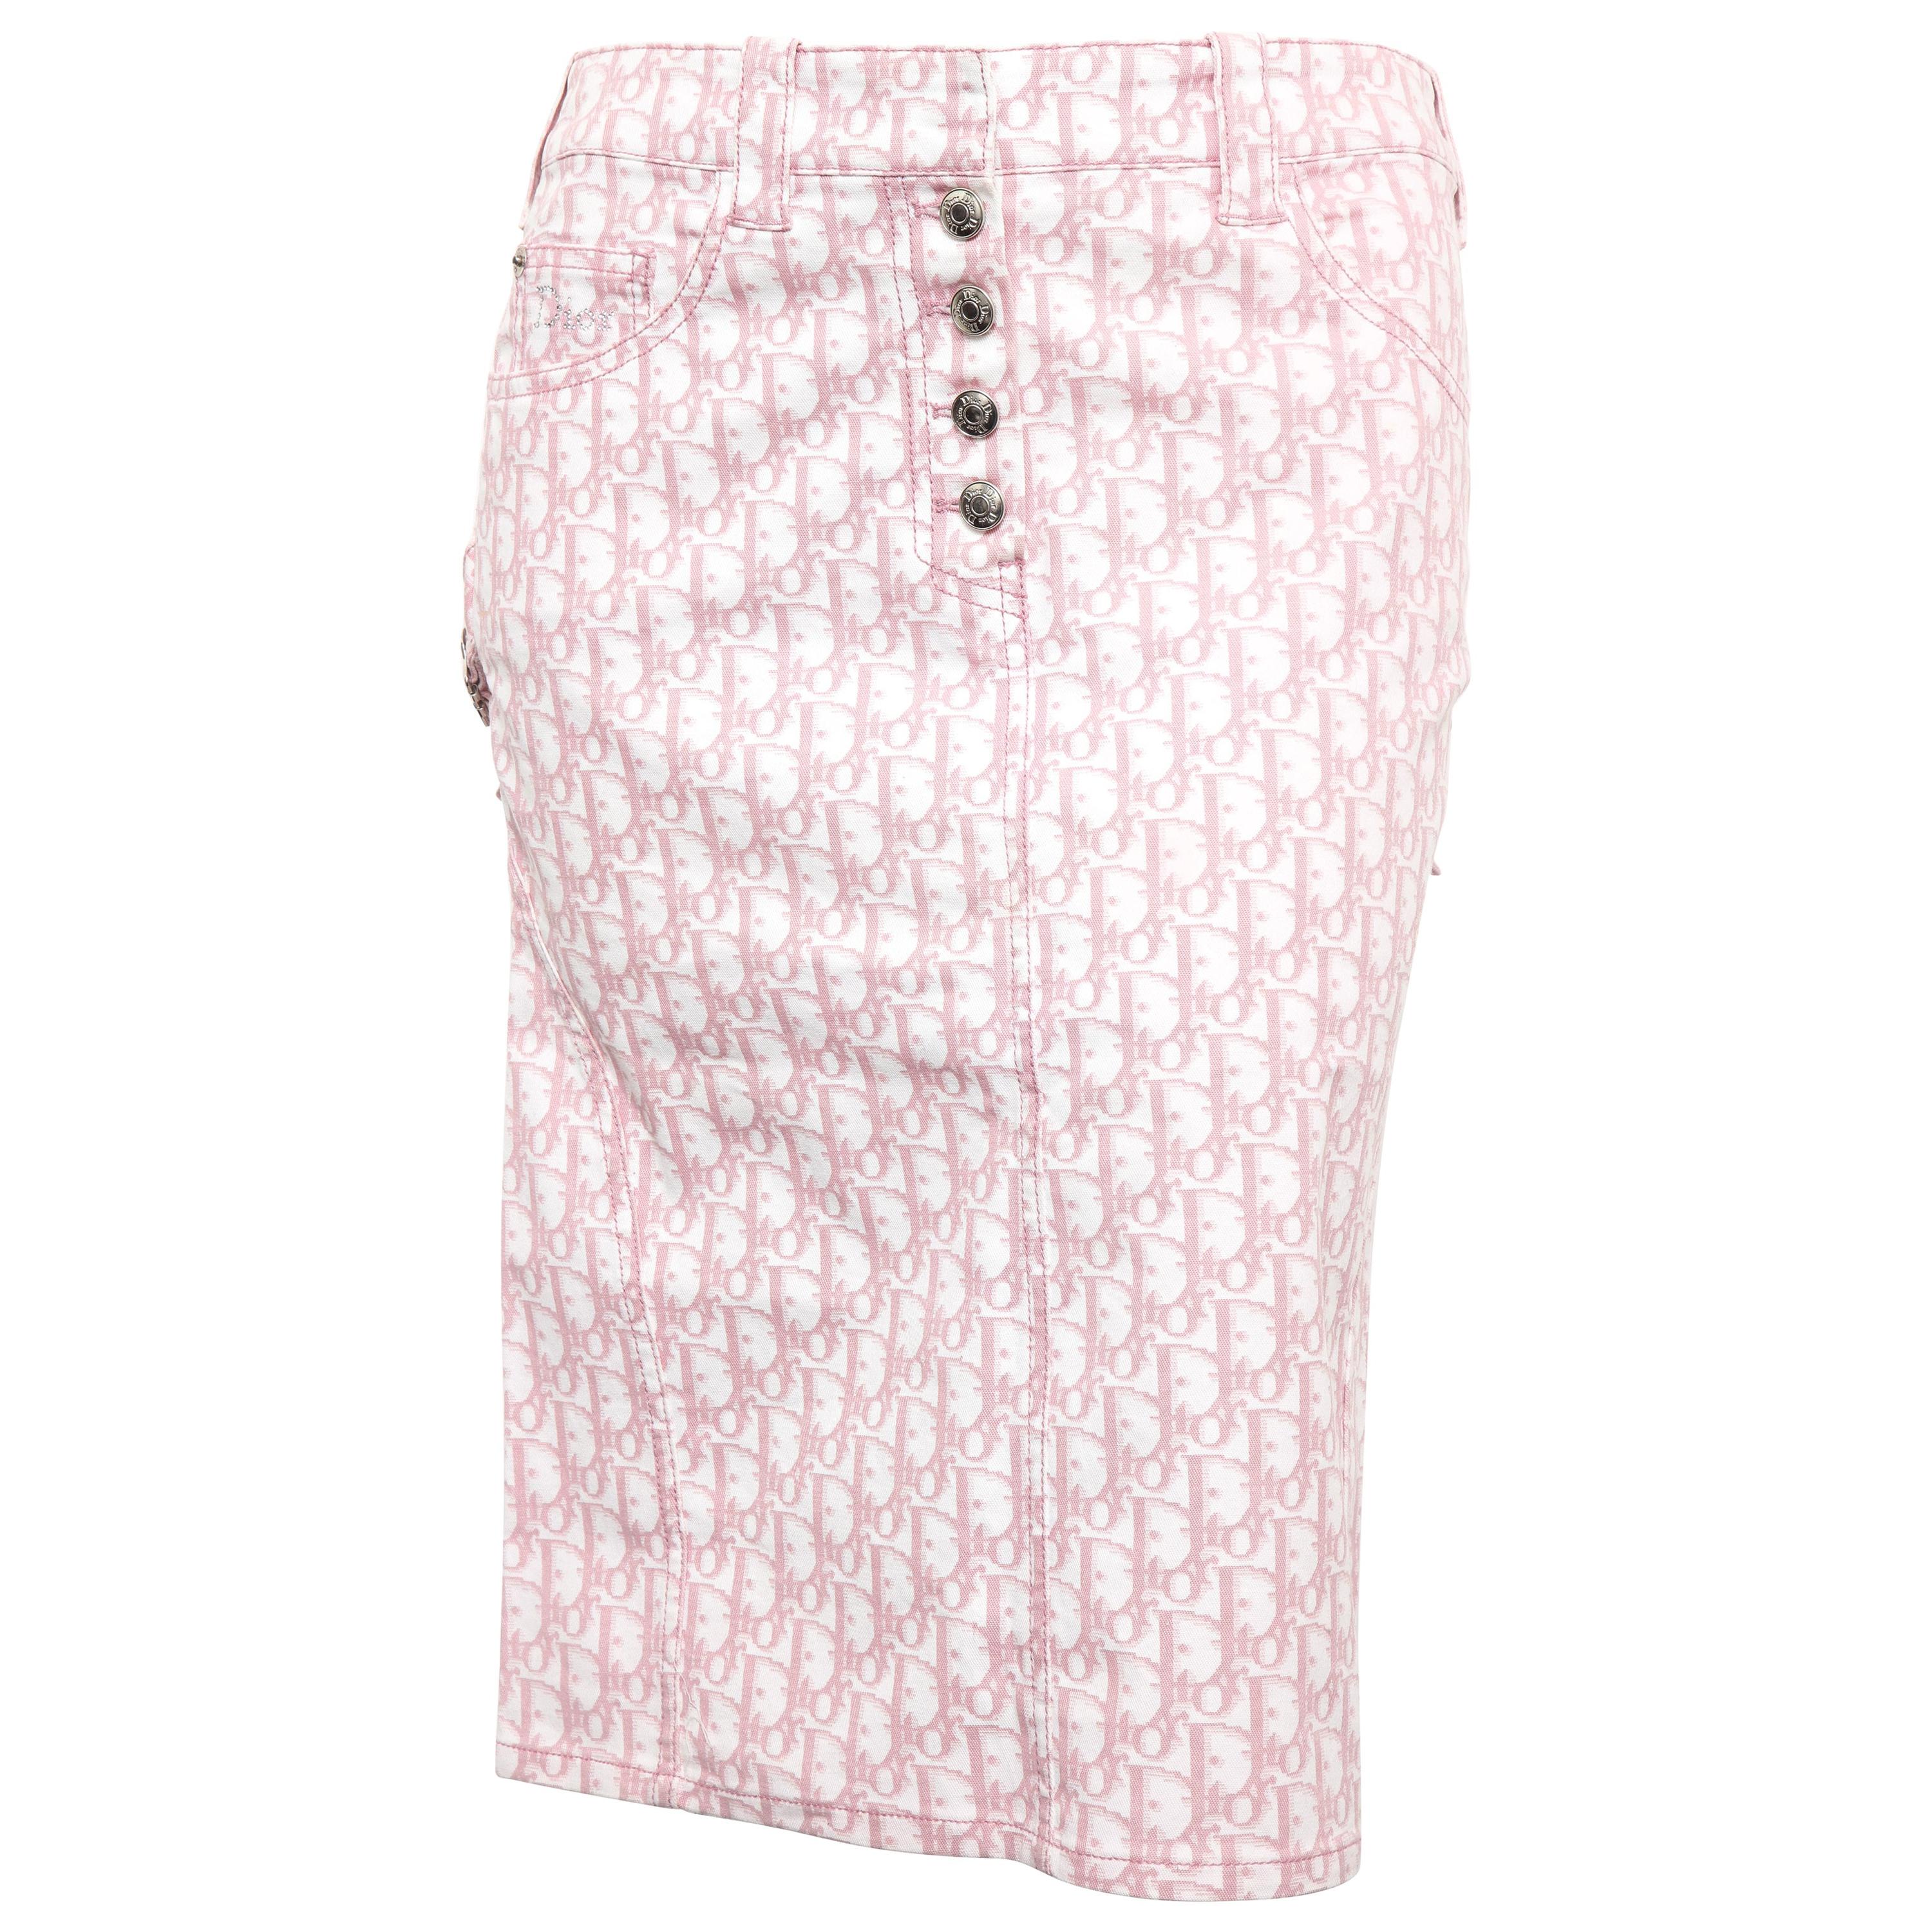 John Galliano for Christian Dior Pink Trotter Logo Pencil Skirt For Sale